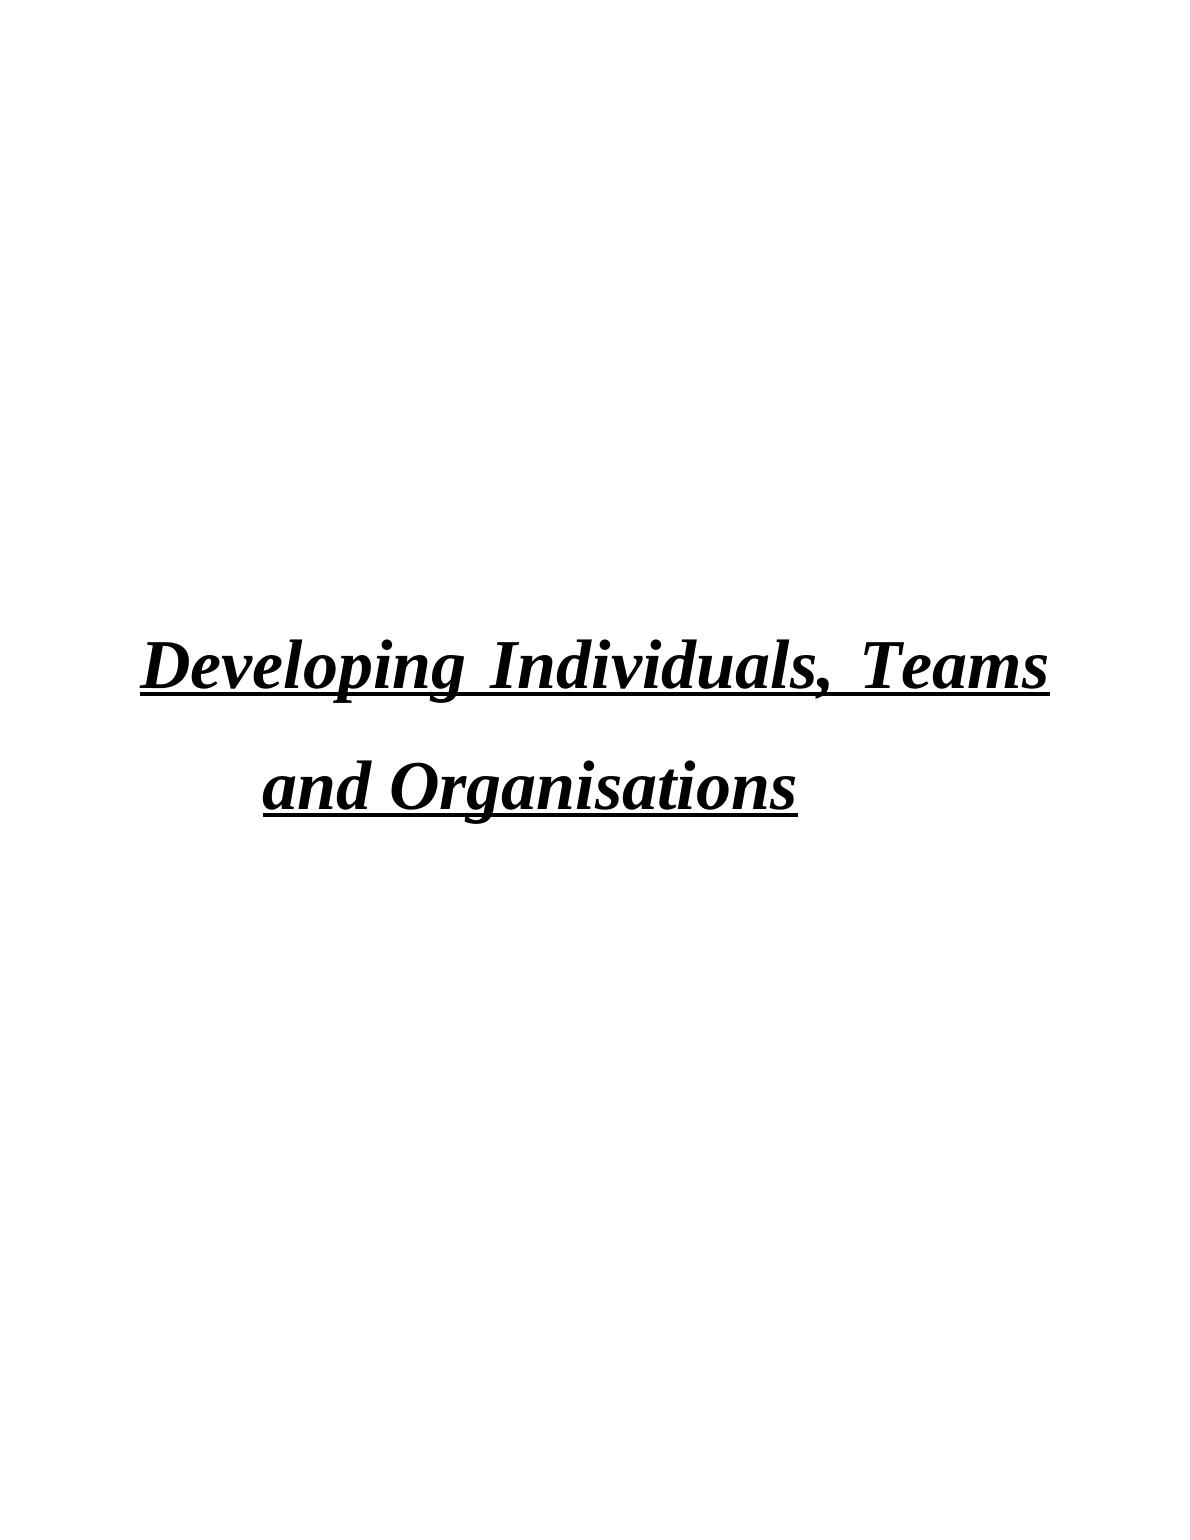 Developing Individuals, Teams - Whirlpool Assignment PDF_1